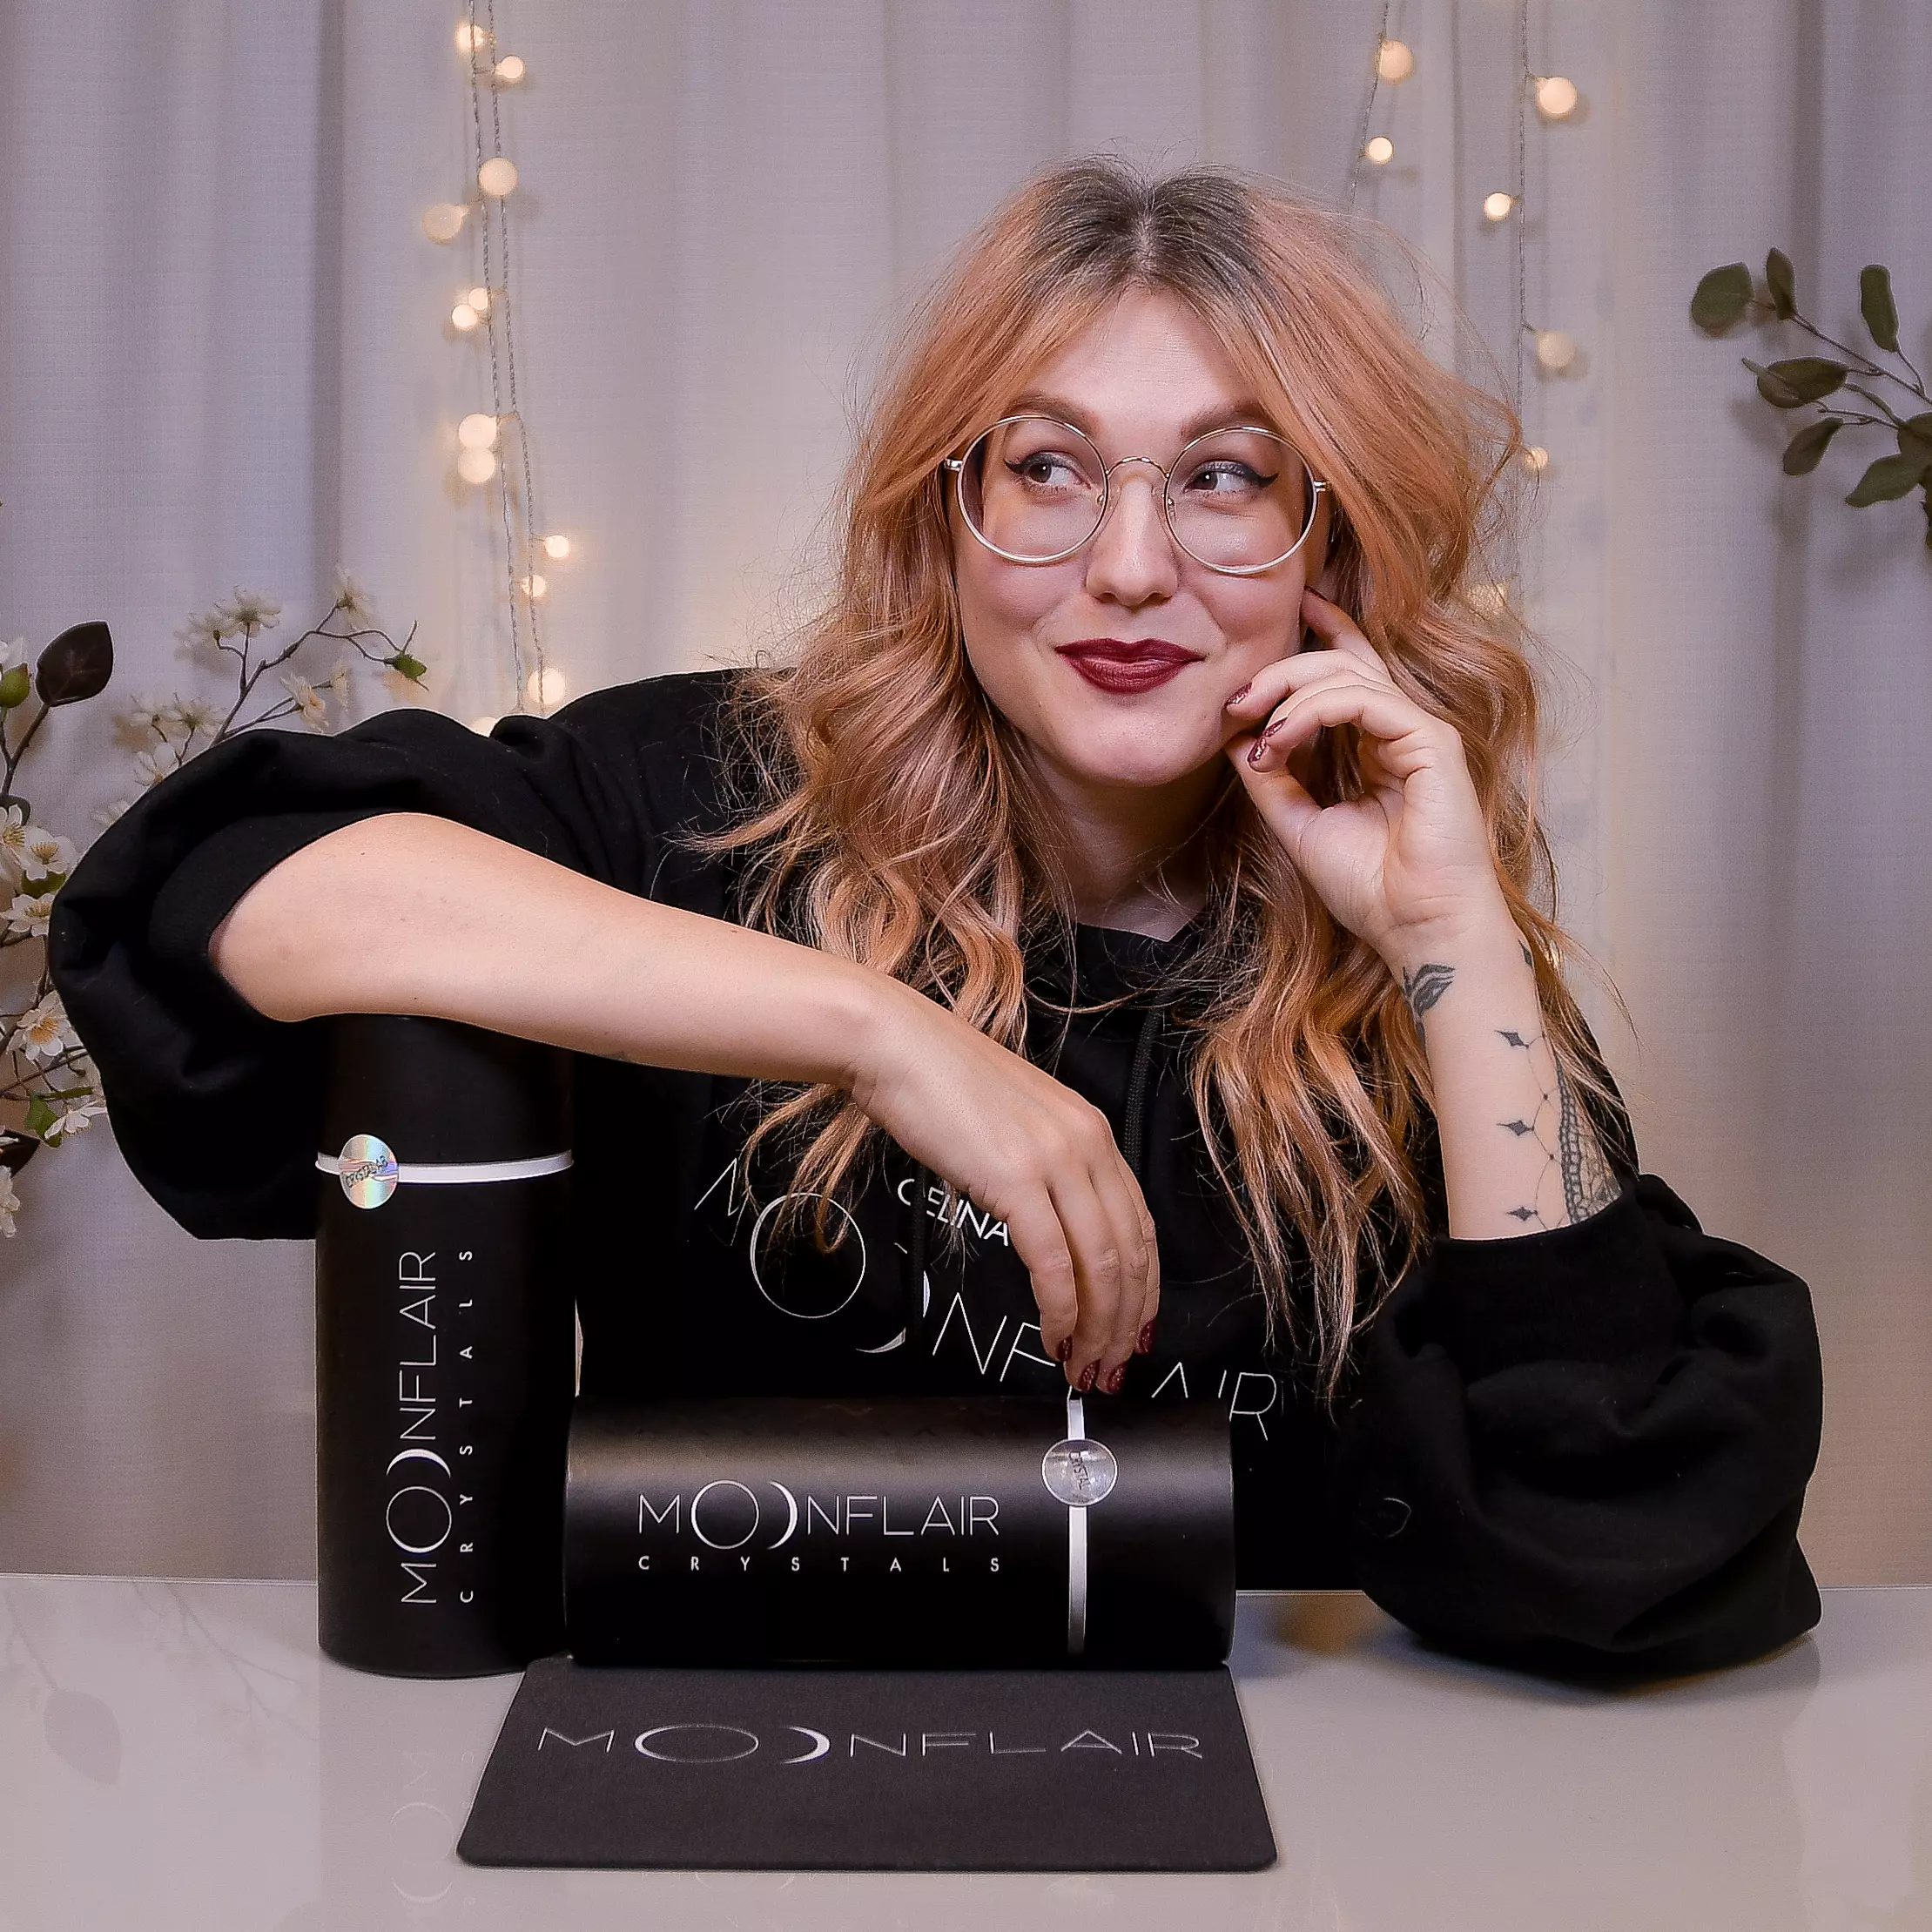 Celina Ryden's MoonFlair - Crystal AB Starter Kit *Signed by Celina Ryden* - Creata Beauty - Professional Beauty Products